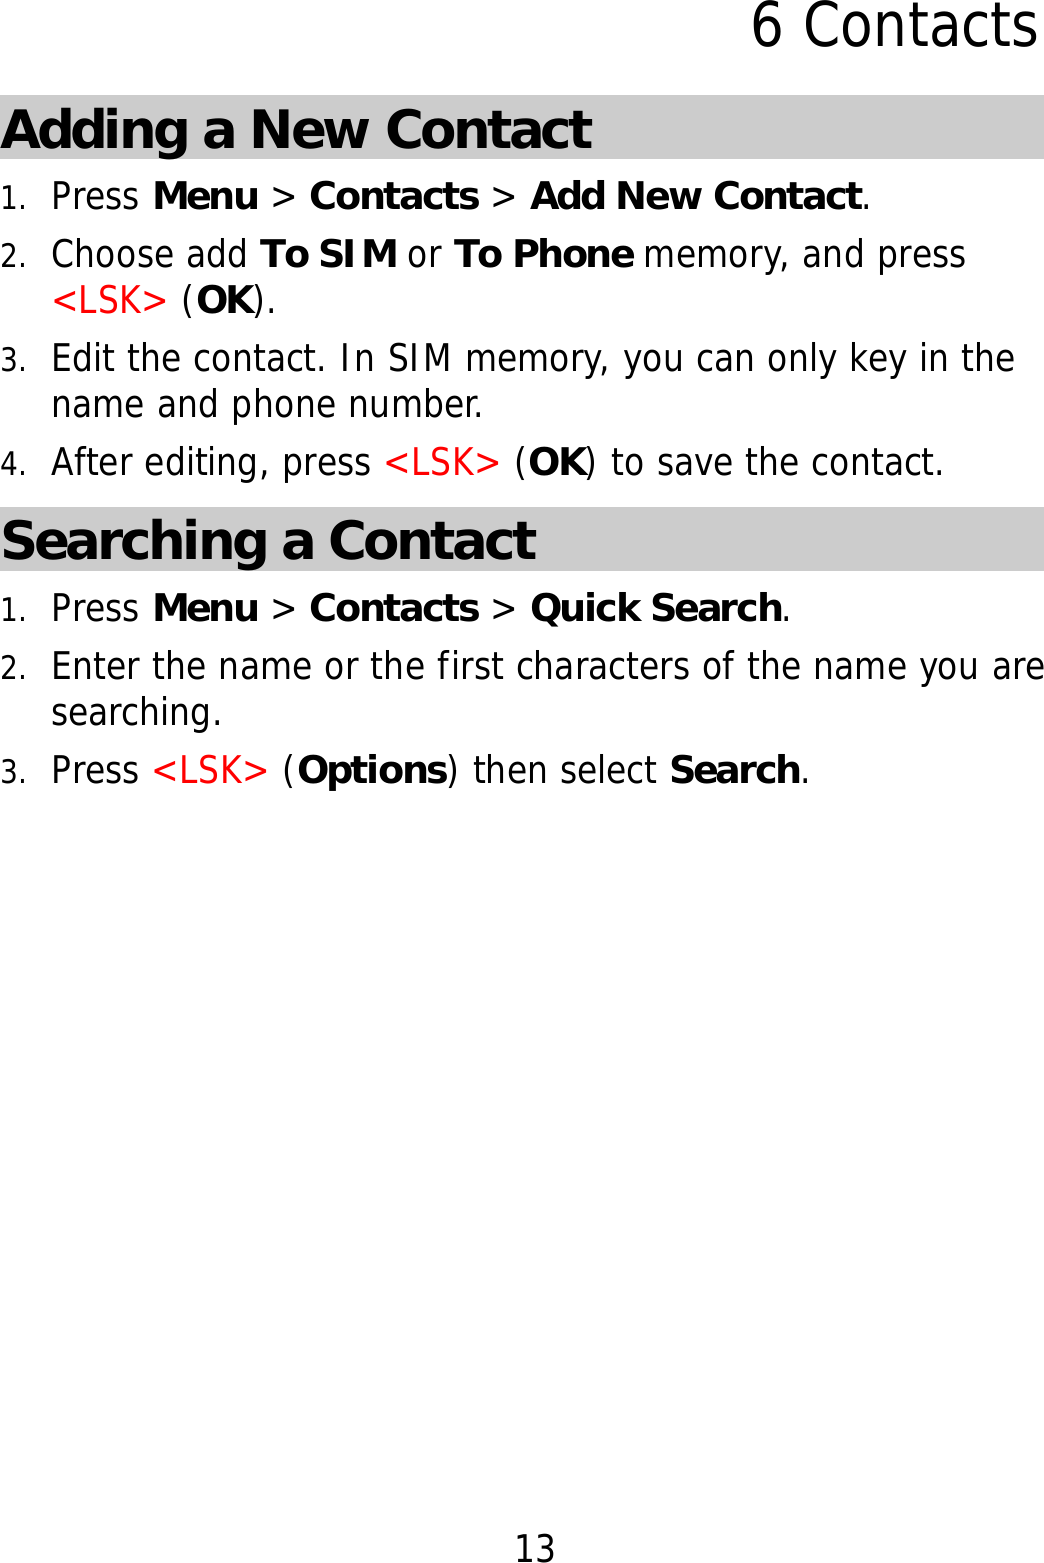 13 6 Contacts Adding a New Contact 1. Press Menu &gt; Contacts &gt; Add New Contact. 2. Choose add To SIM or To Phone memory, and press &lt;LSK&gt; (OK). 3. Edit the contact. In SIM memory, you can only key in the name and phone number.  4. After editing, press &lt;LSK&gt; (OK) to save the contact. Searching a Contact 1. Press Menu &gt; Contacts &gt; Quick Search. 2. Enter the name or the first characters of the name you are searching.  3. Press &lt;LSK&gt; (Options) then select Search. 